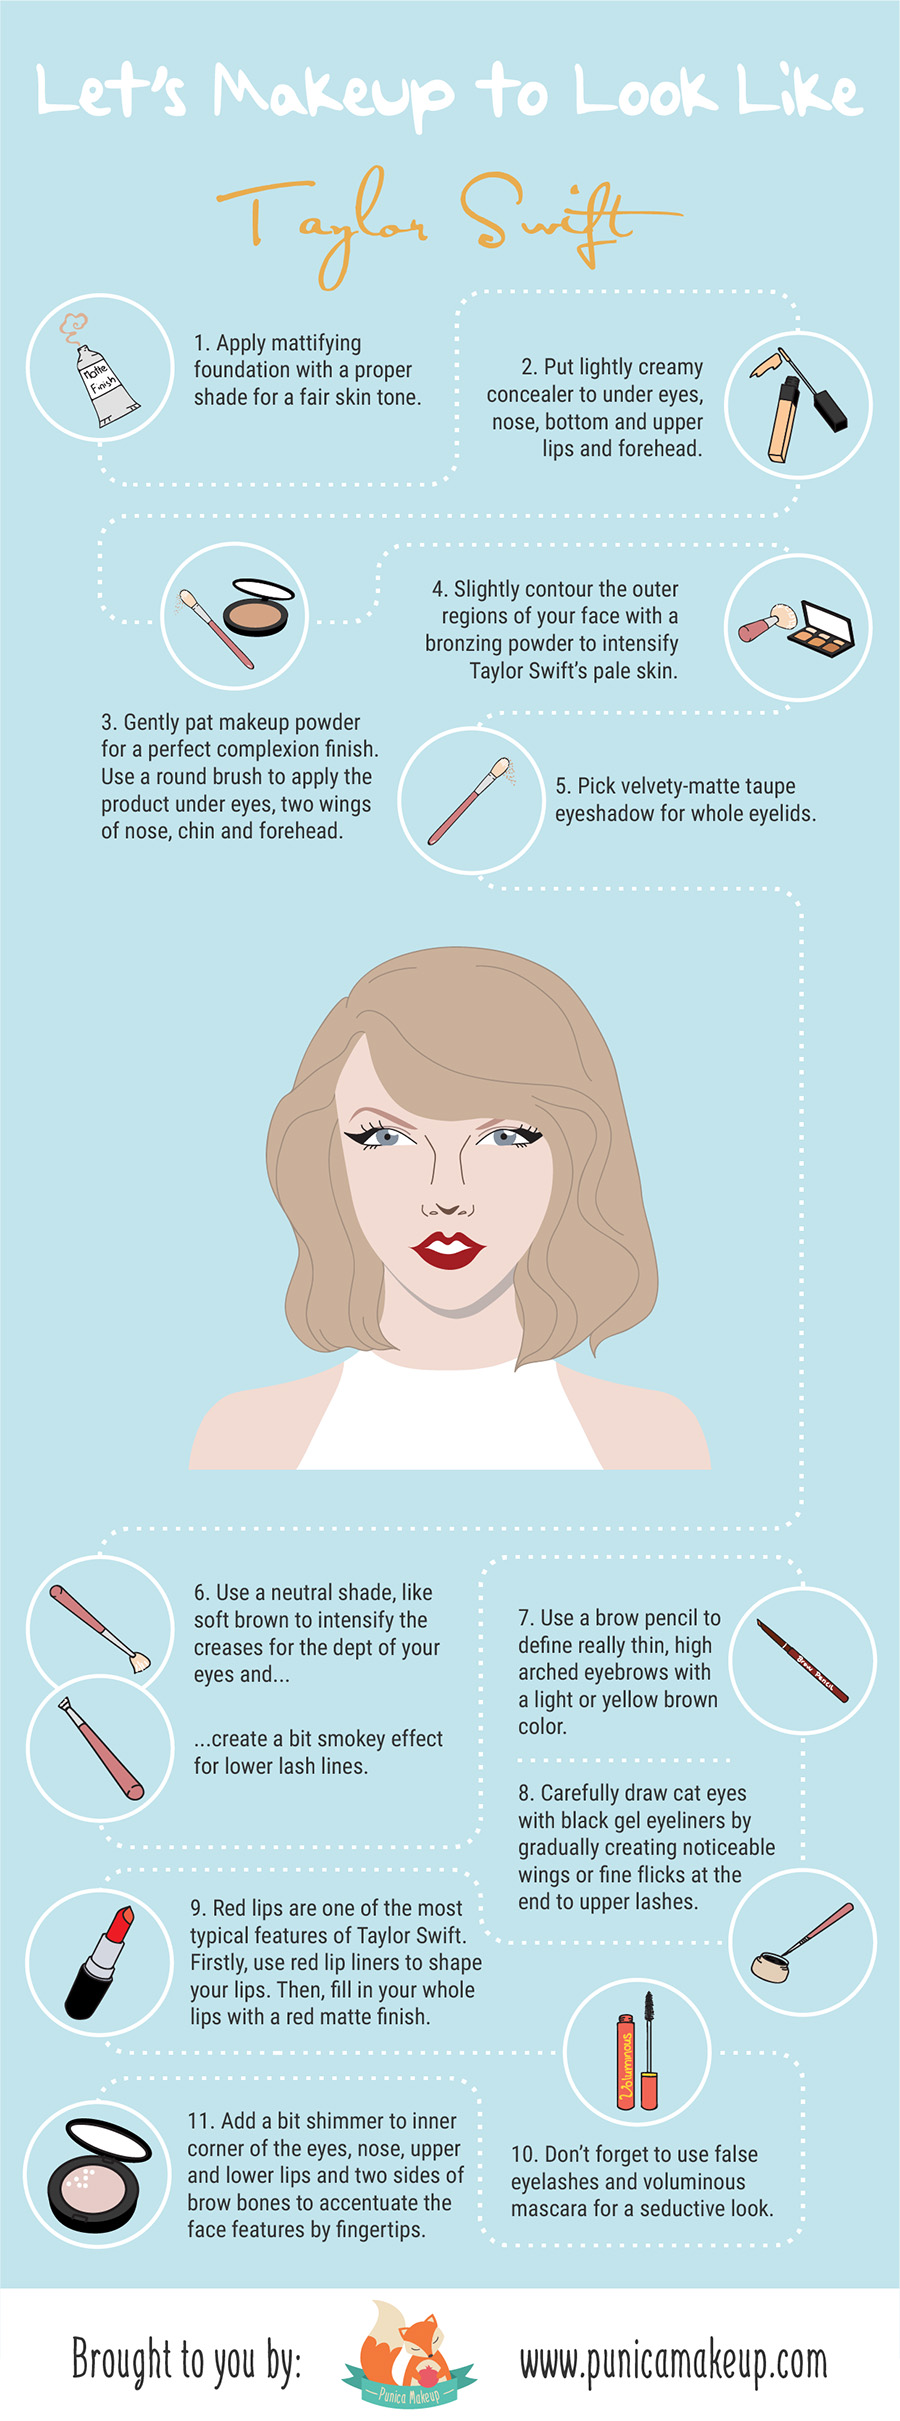 Infographic Lets Makeup to Look Like Taylor Swift